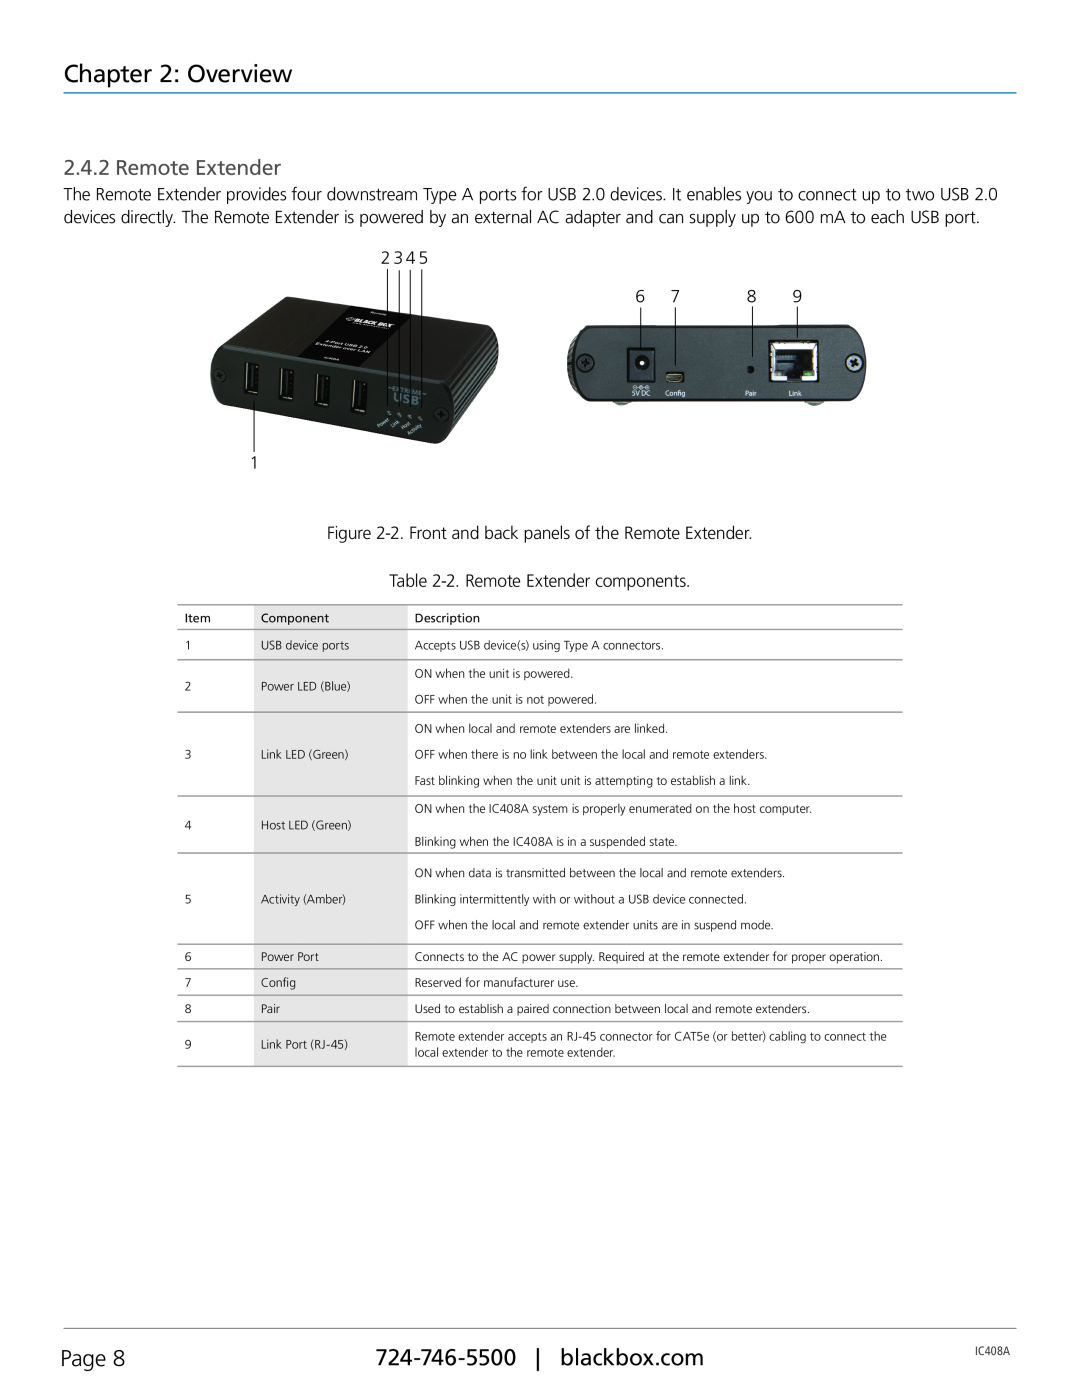 Black Box IC408A Overview, Page, 2 3, 2. Front and back panels of the Remote Extender, 2. Remote Extender components 